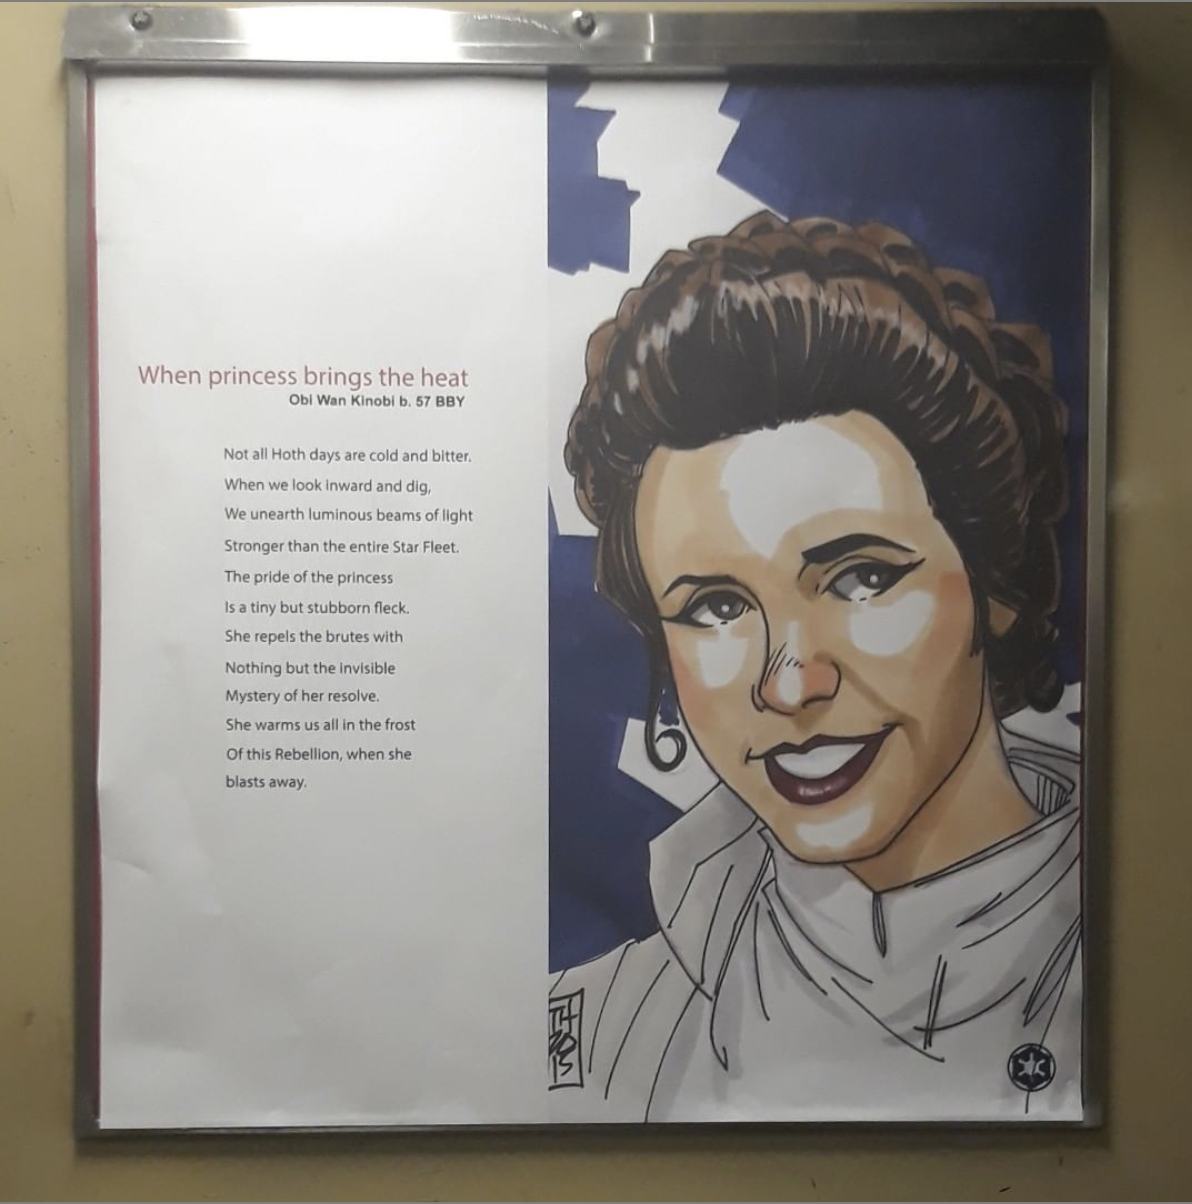 illustrational poster inside of an MTA subway cart of Princess Leia from the Star Wars films